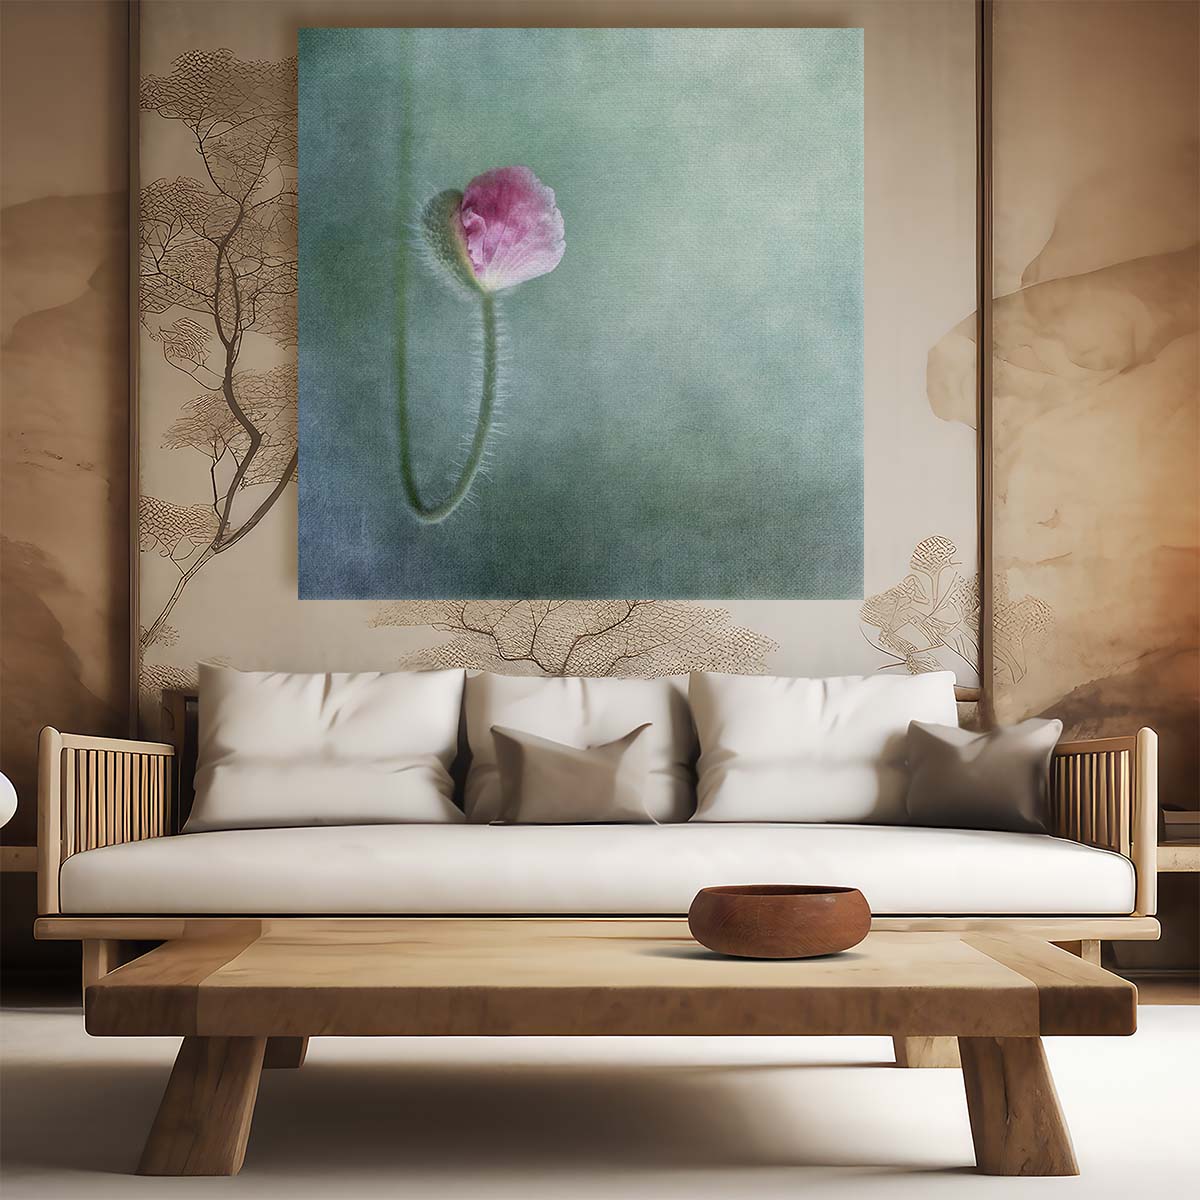 Springtime Romance Blooming Tulip Duo in Macro Blossom Wall Art by Luxuriance Designs. Made in USA.